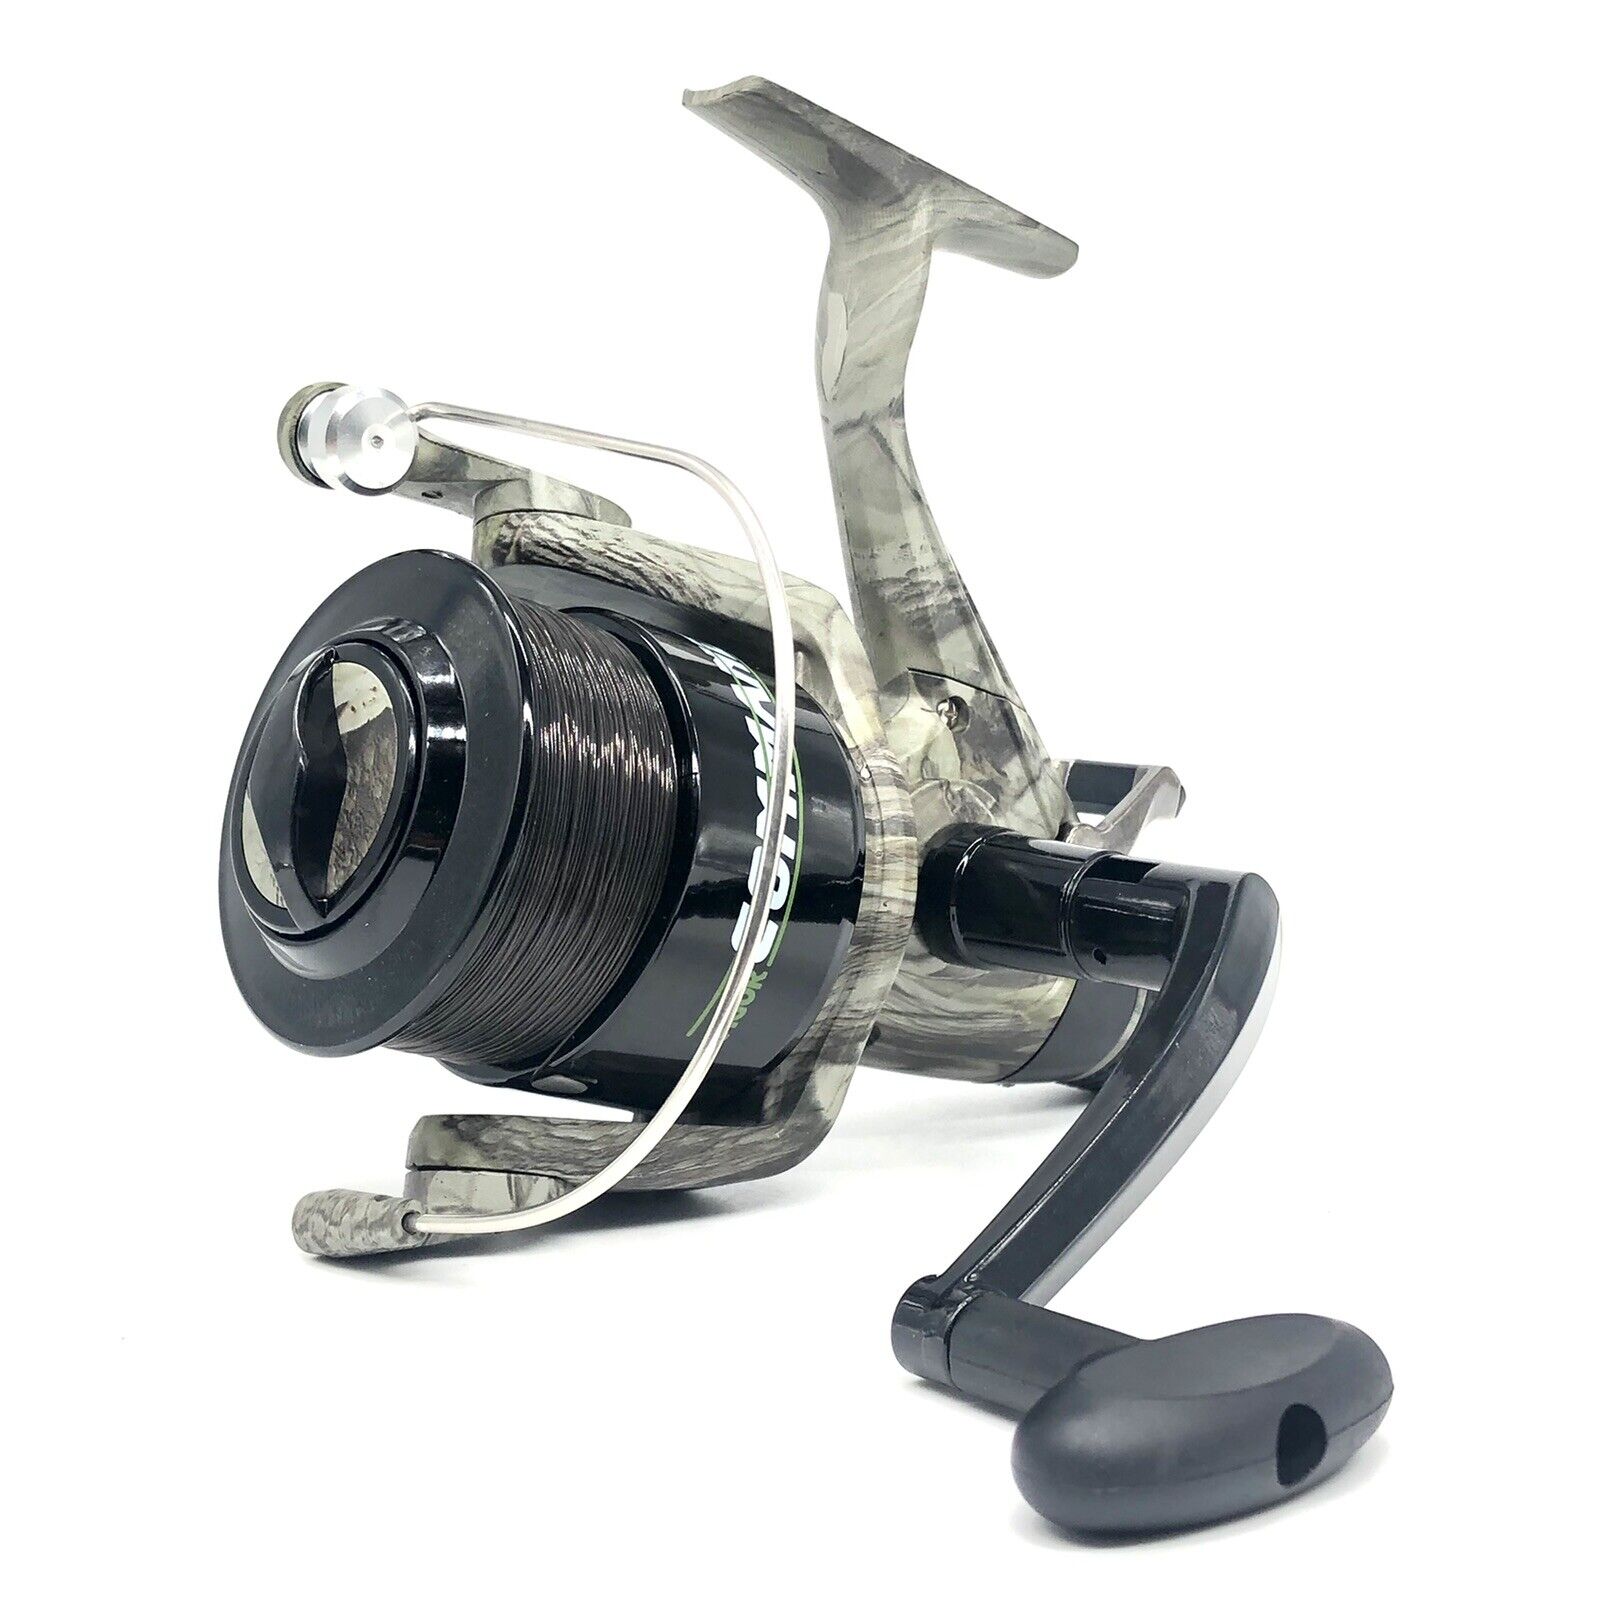 COMMANDO 40 BAIT RUNNER FISHING REEL IN CAMO WITH 12LB LINE CARP FISHING  TACKLE